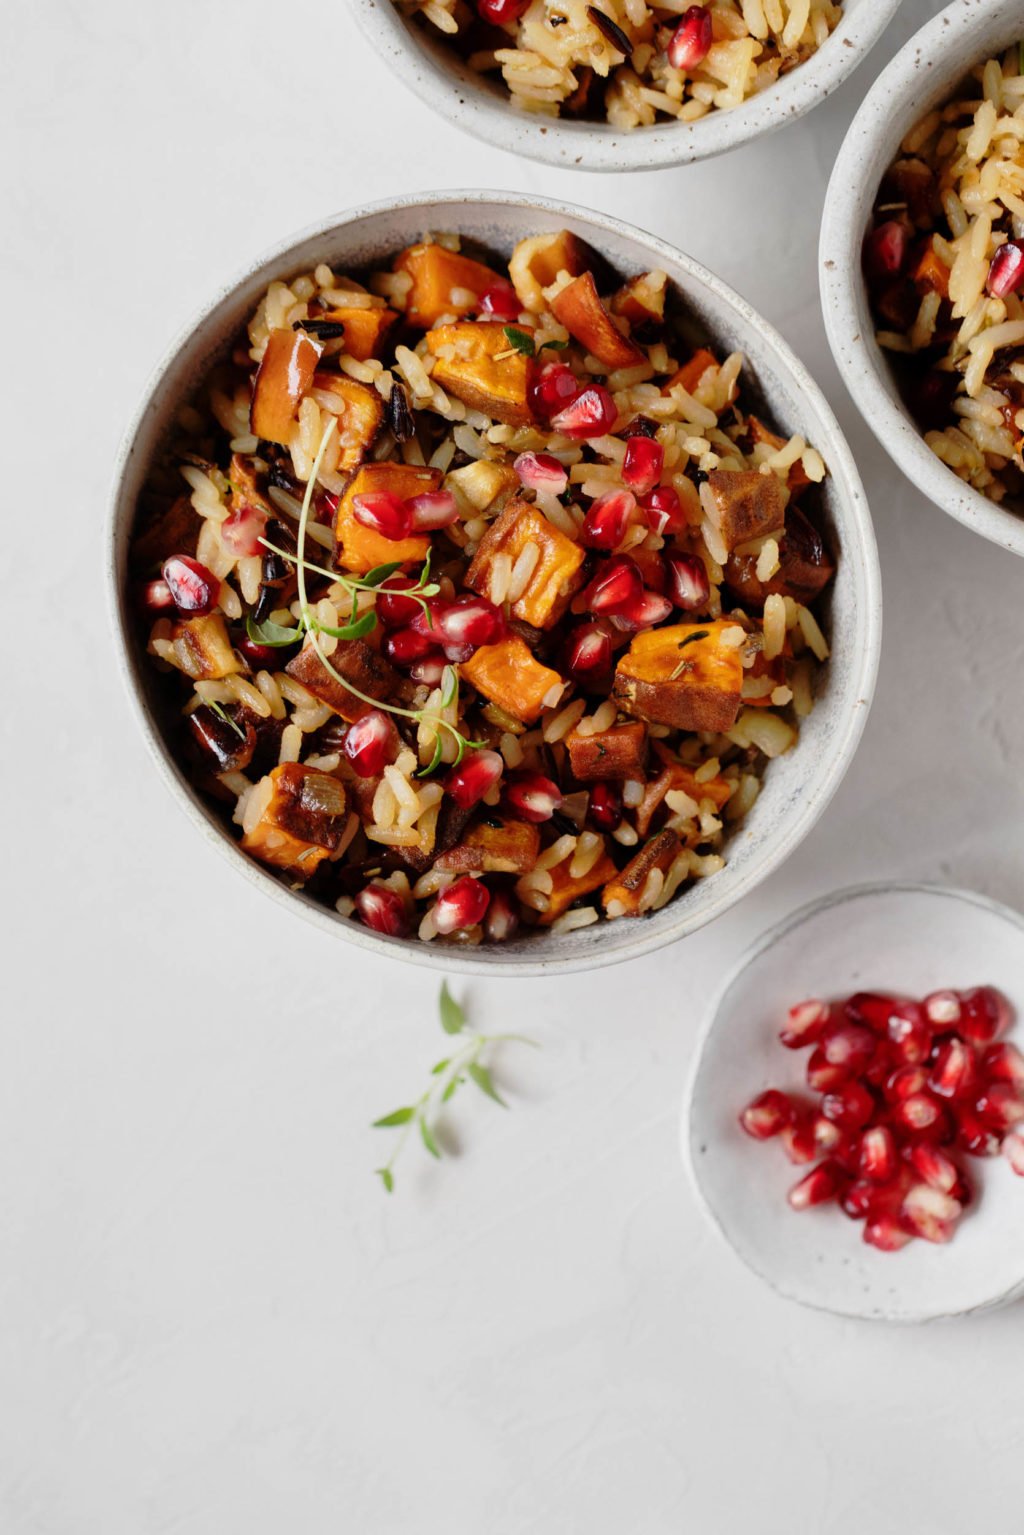 An overhead photograph of a bowl of sweet potatoes, pomegranate arils, and wild rice.